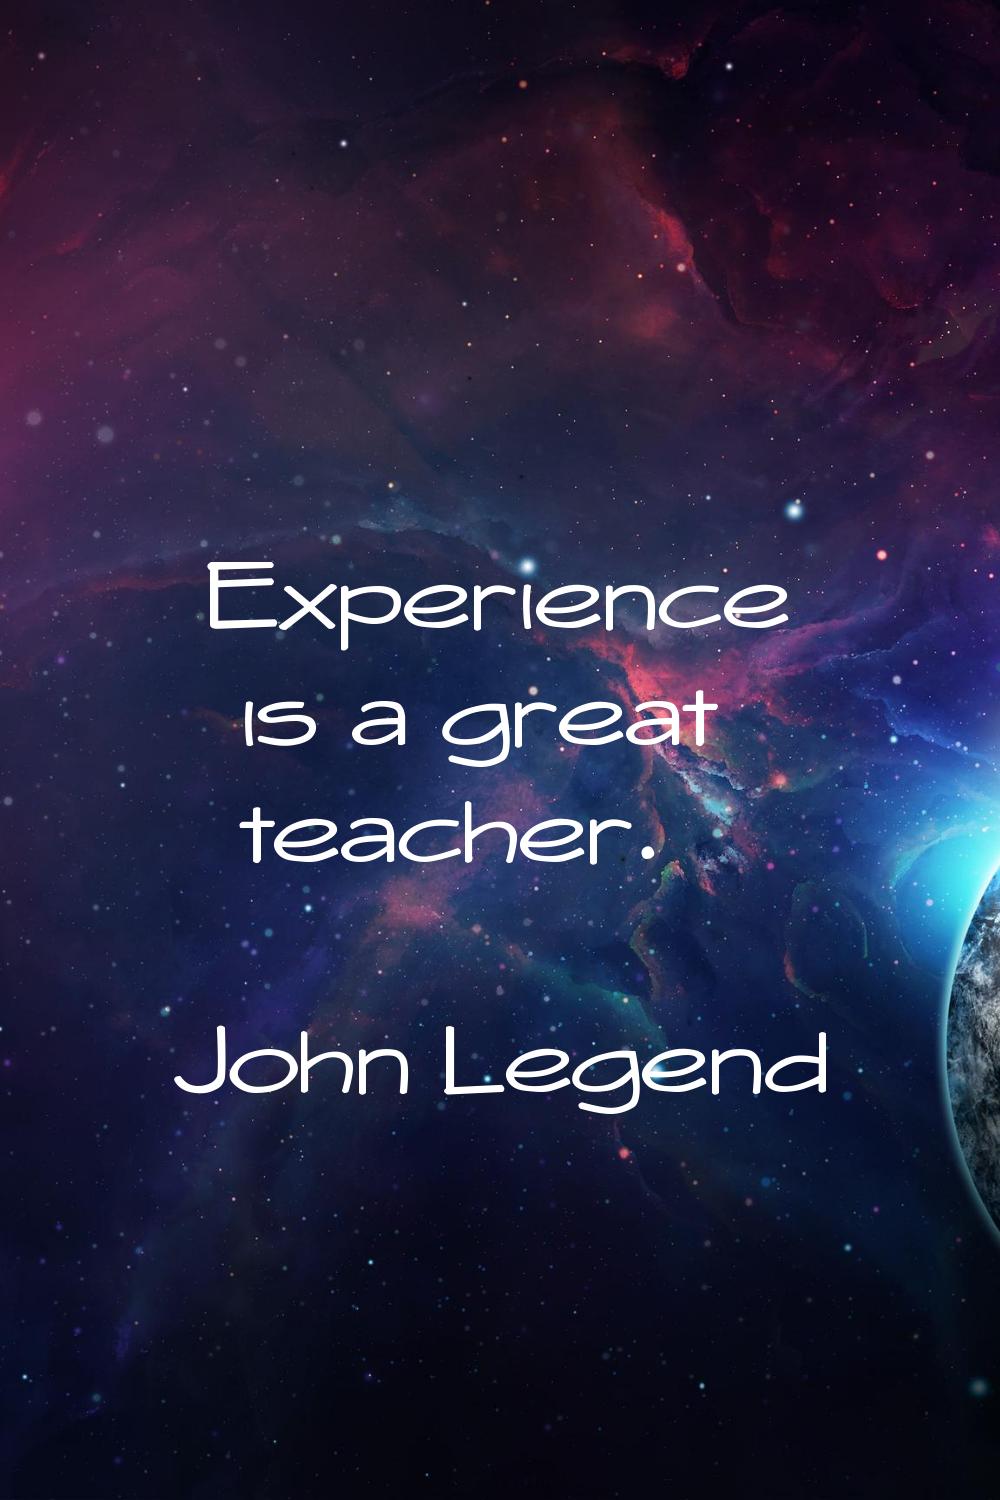 Experience is a great teacher.